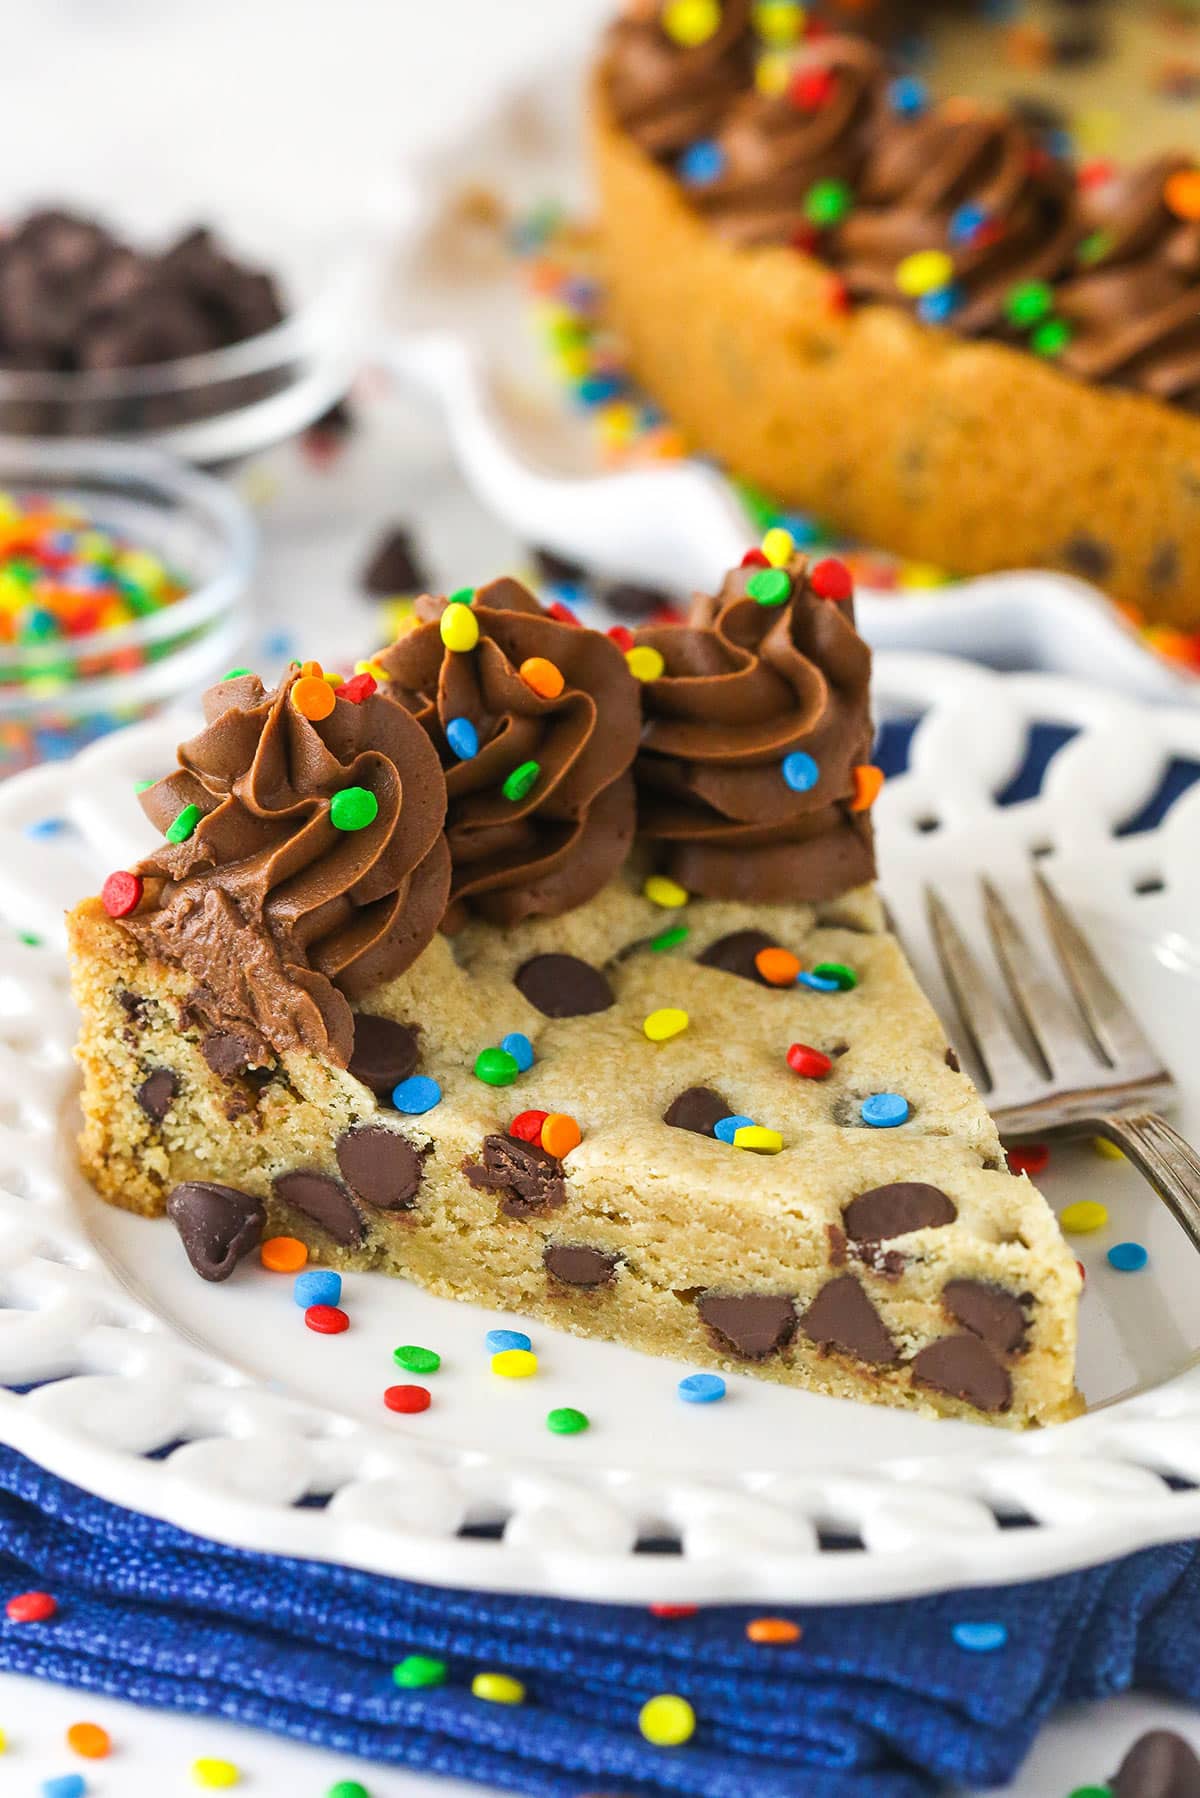 A slice of Chocolate Chip Cookie Cake with a fork on a white plate.